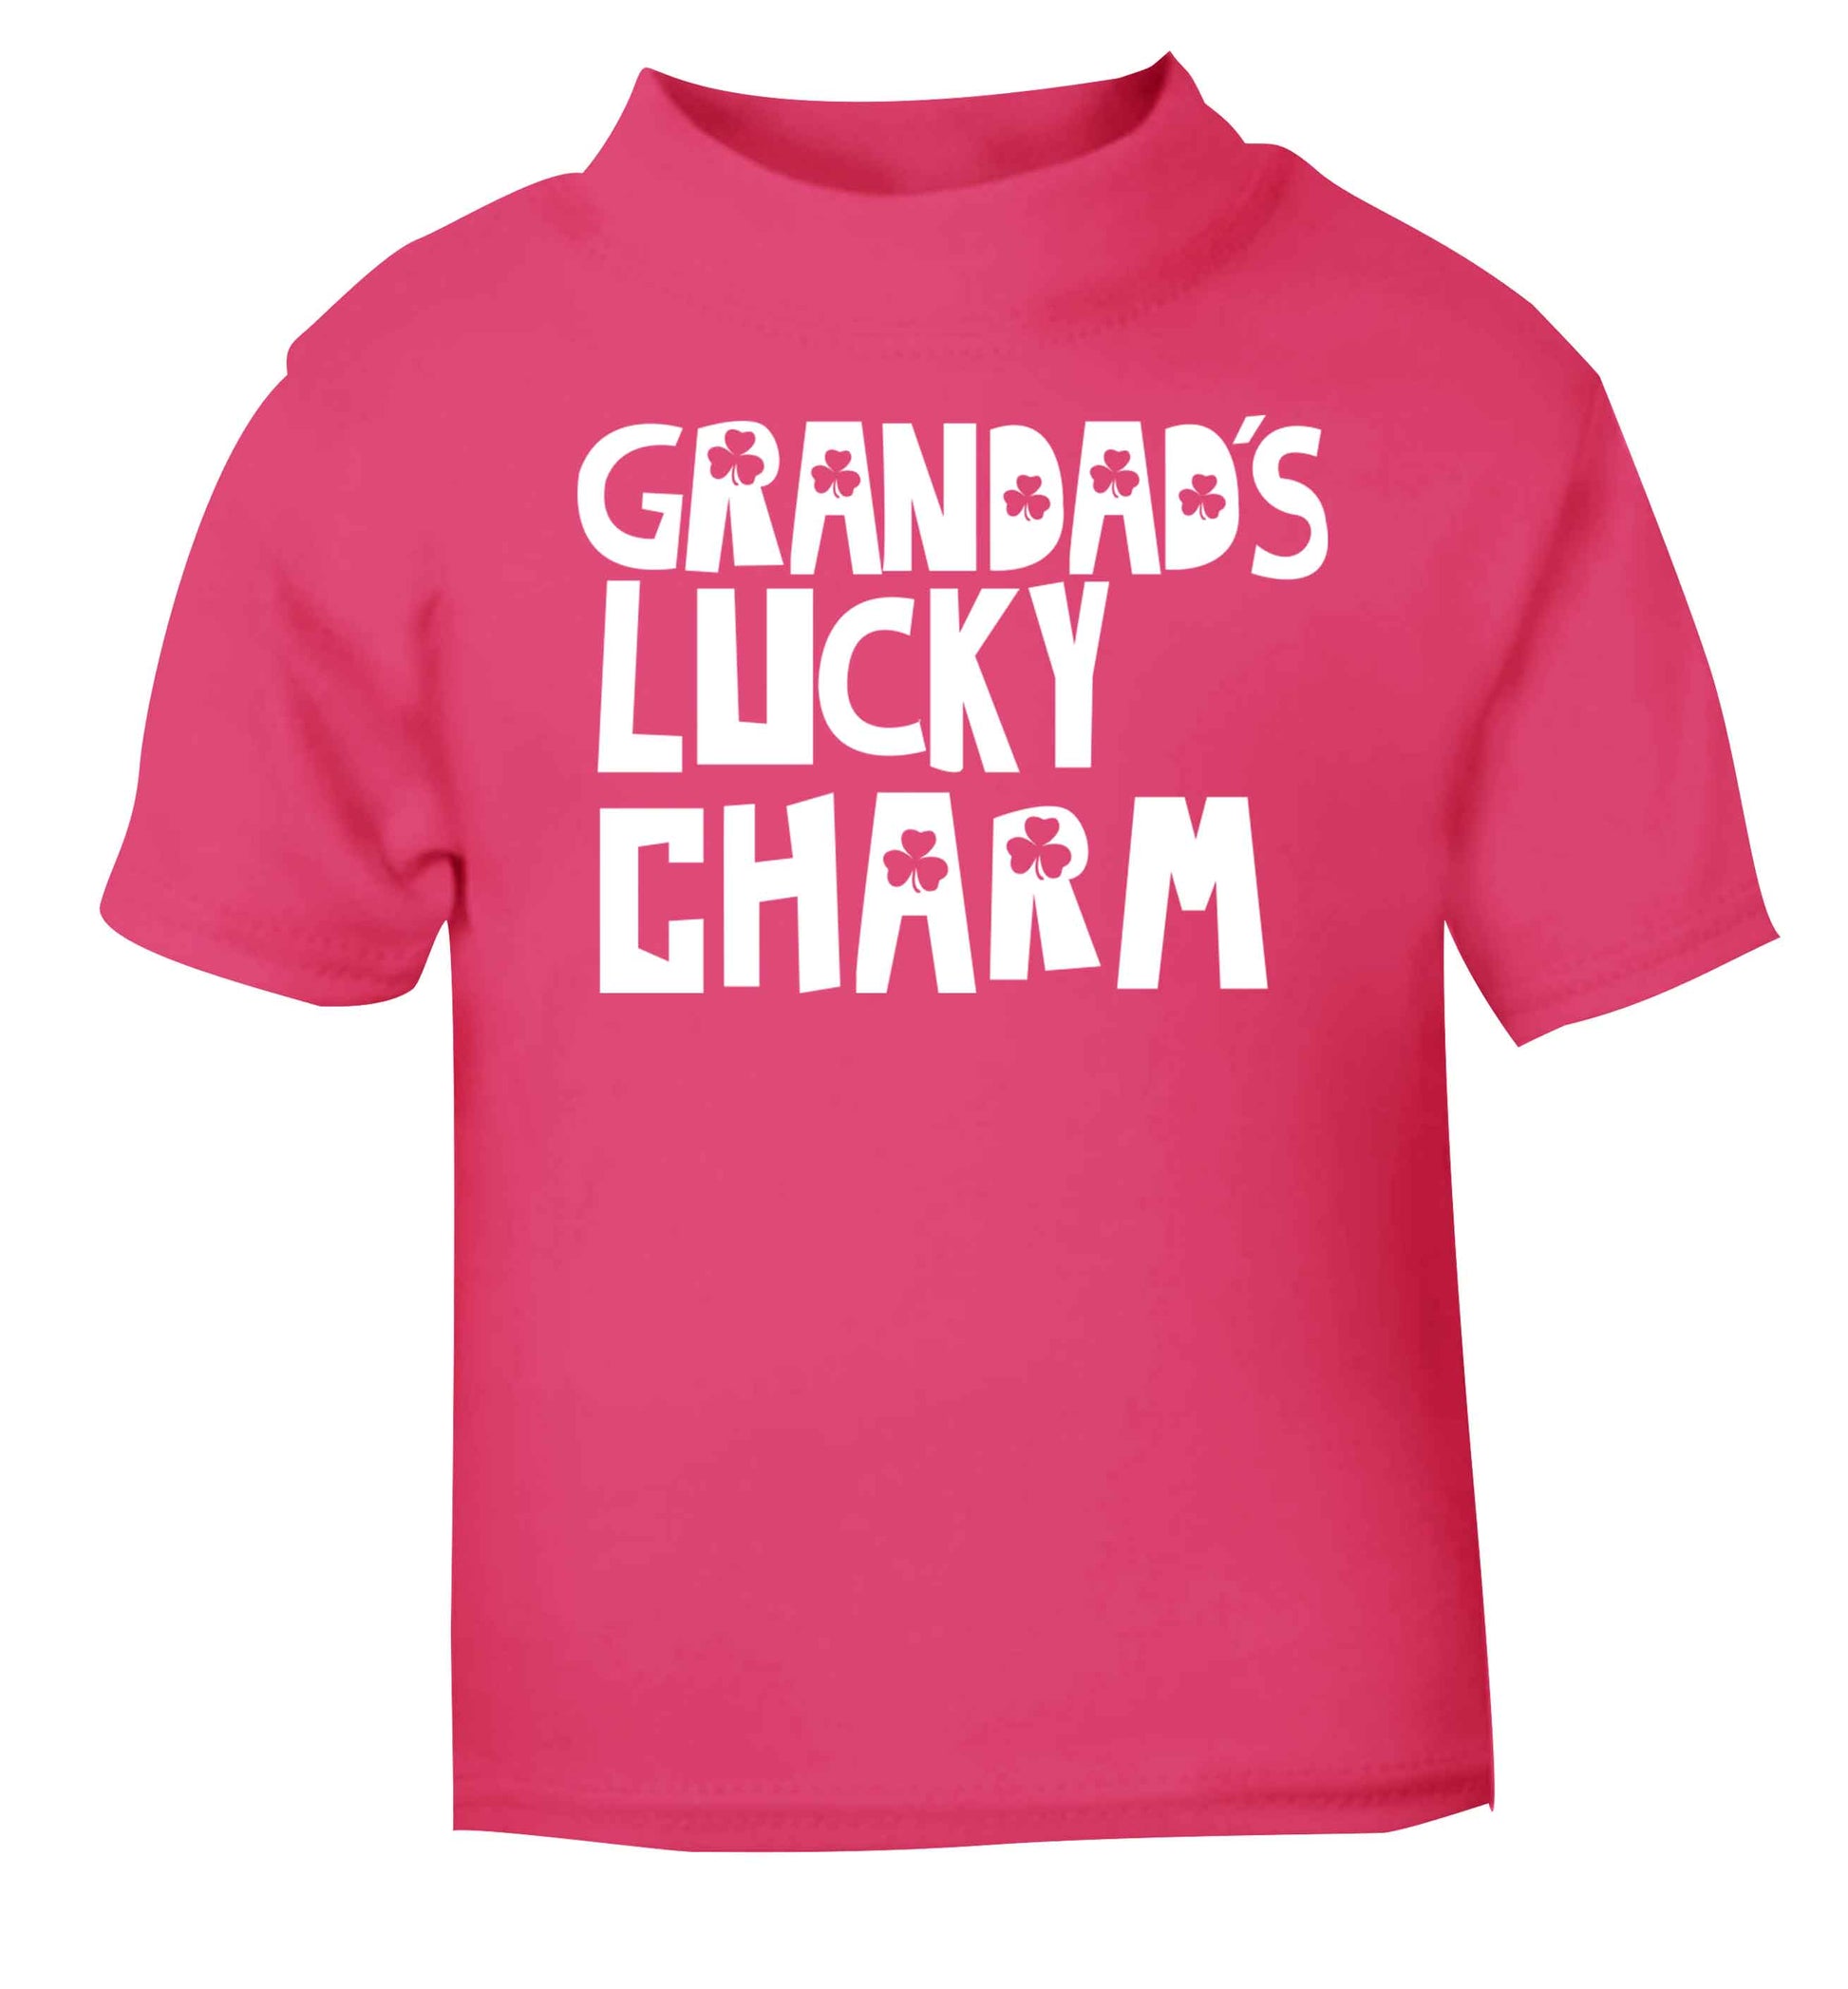 Grandad's lucky charm  pink baby toddler Tshirt 2 Years